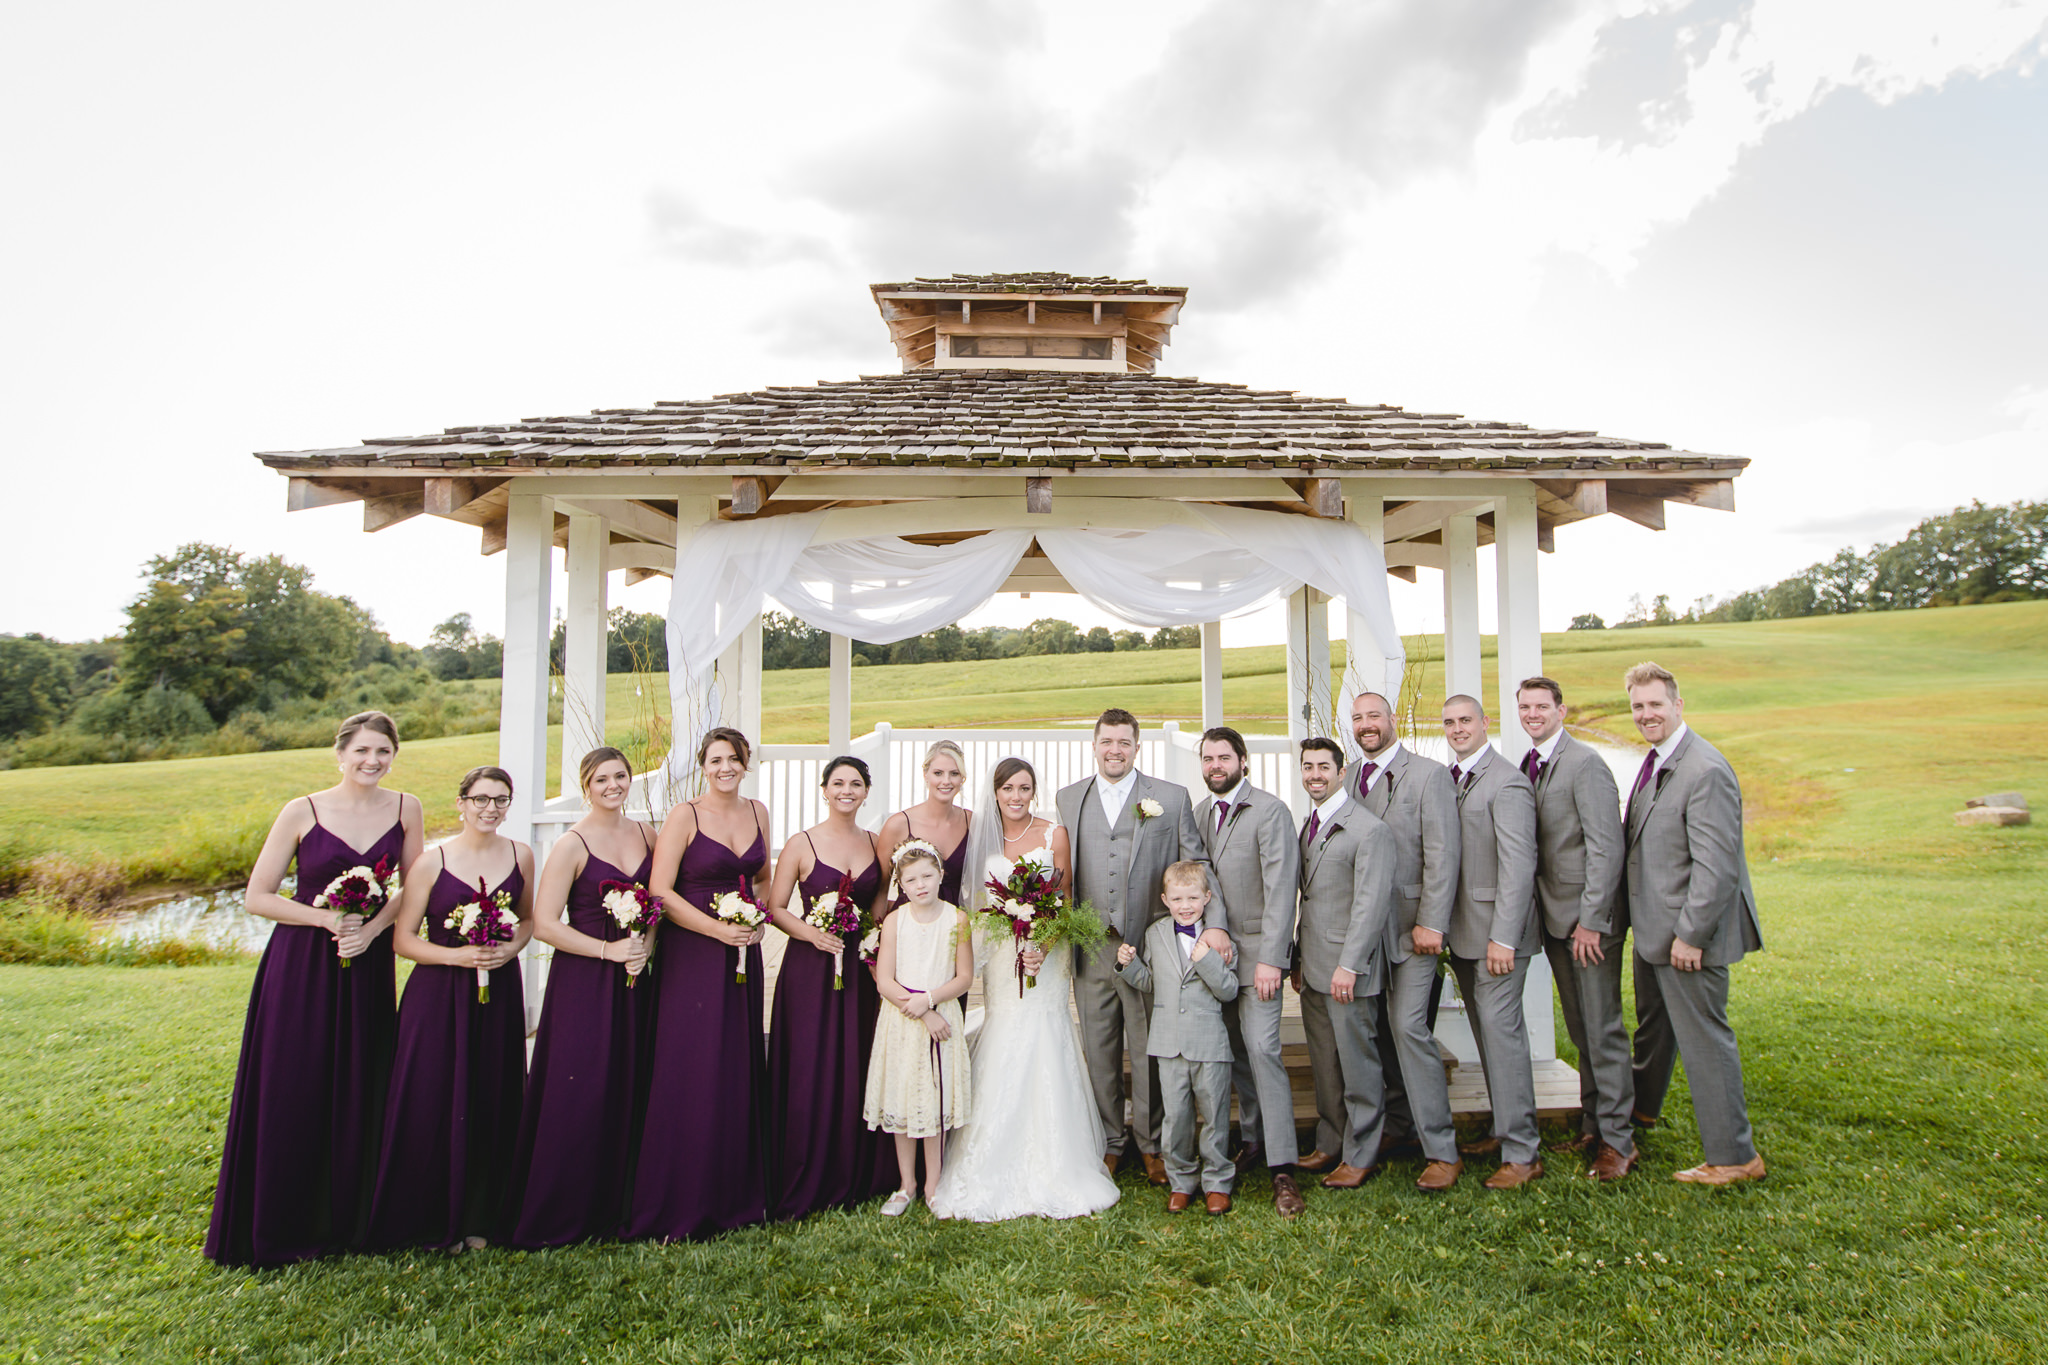 Wedding party in front of the gazebo at White Barn in Prospect, PA